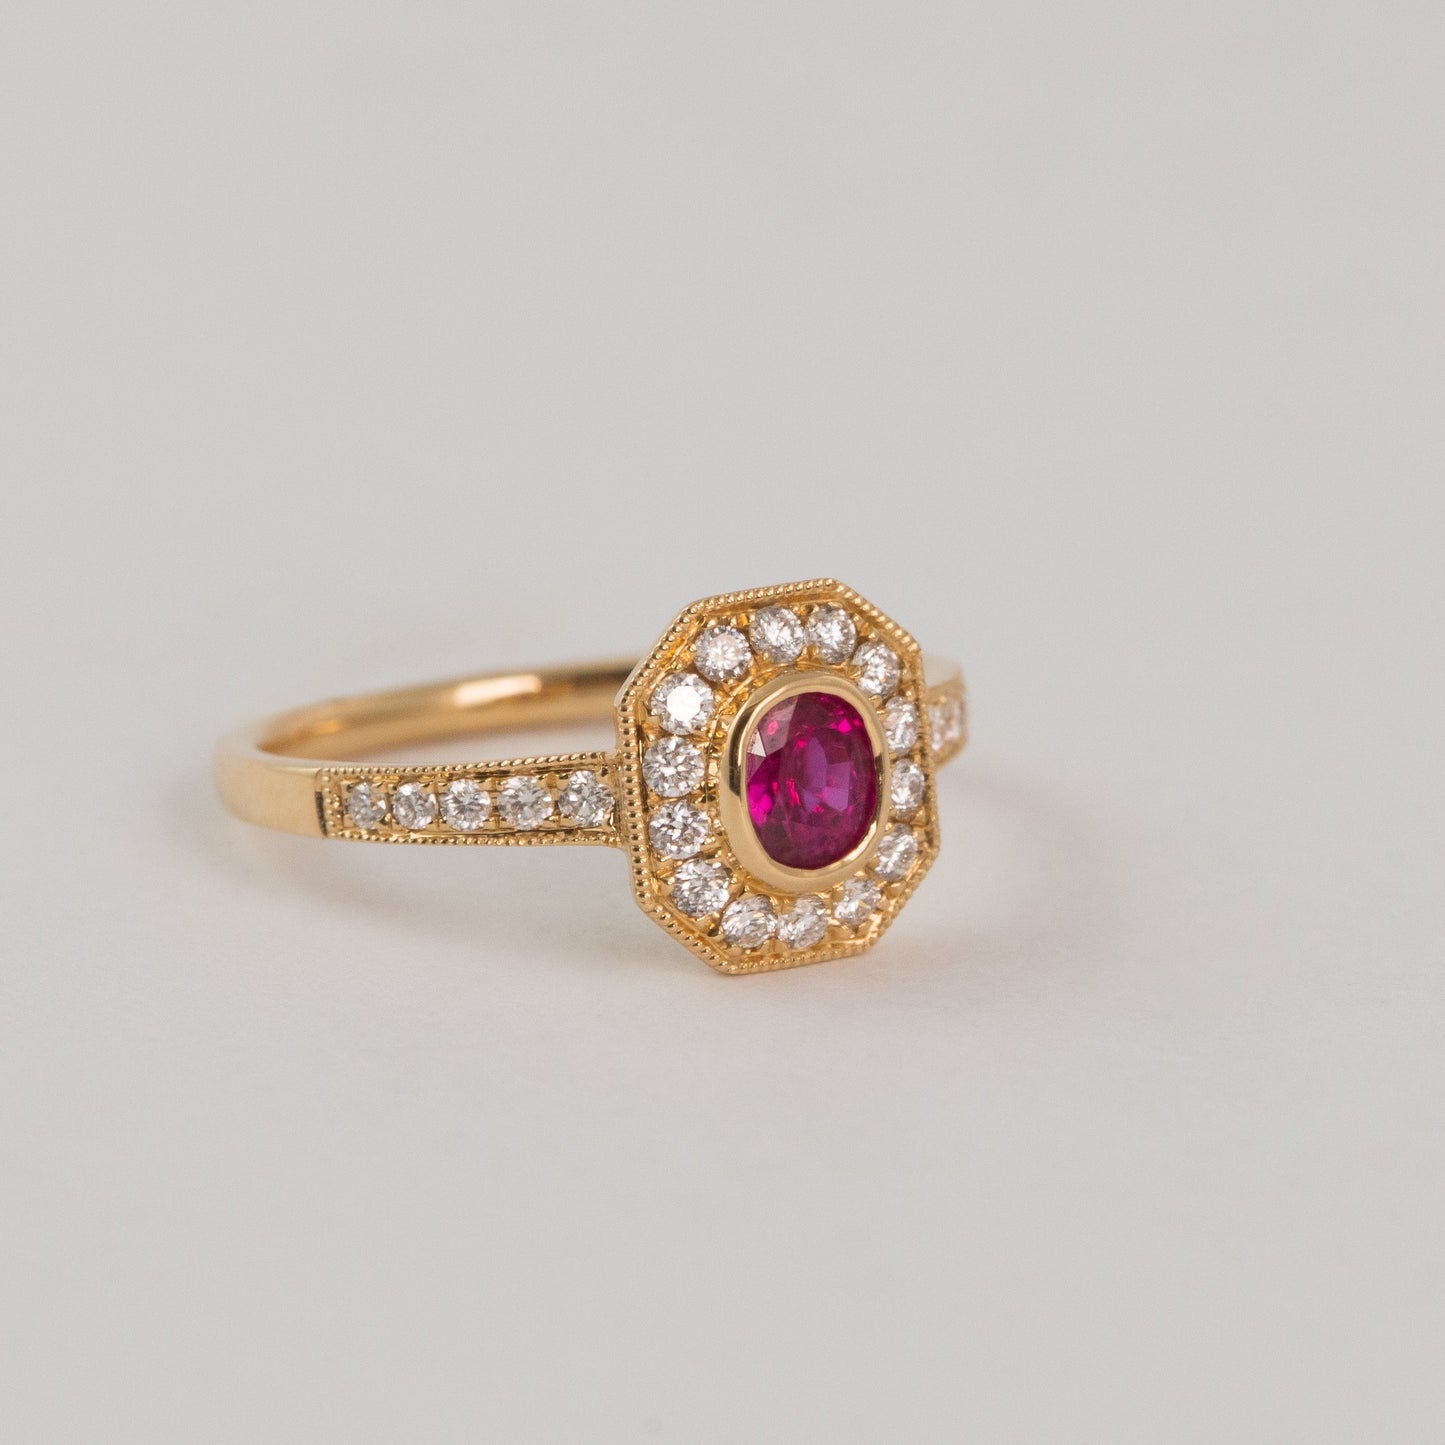 The Octagon Ruby Ring